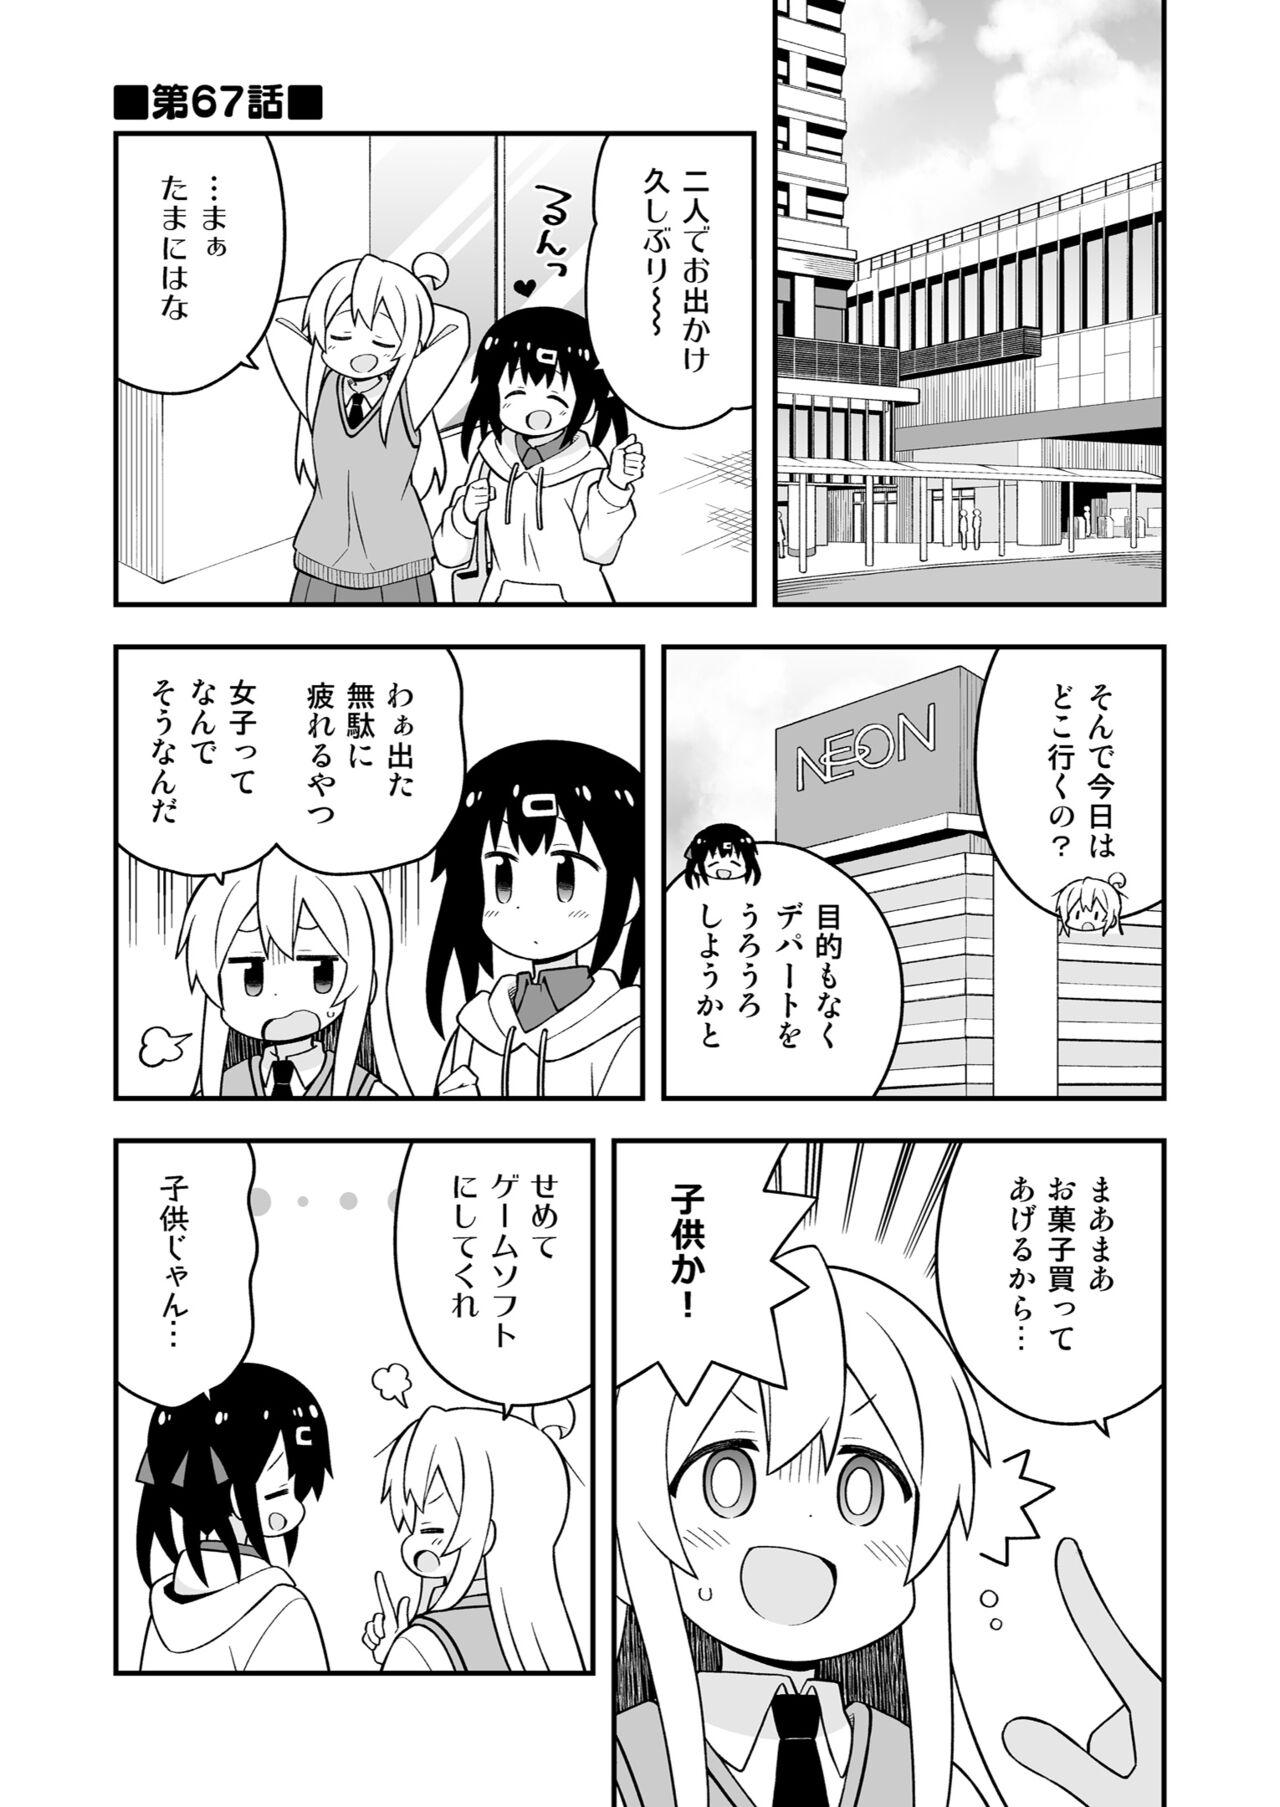 Long Onii-chan wa Oshimai! 23 - Onii chan wa oshimai Naturaltits - Page 3